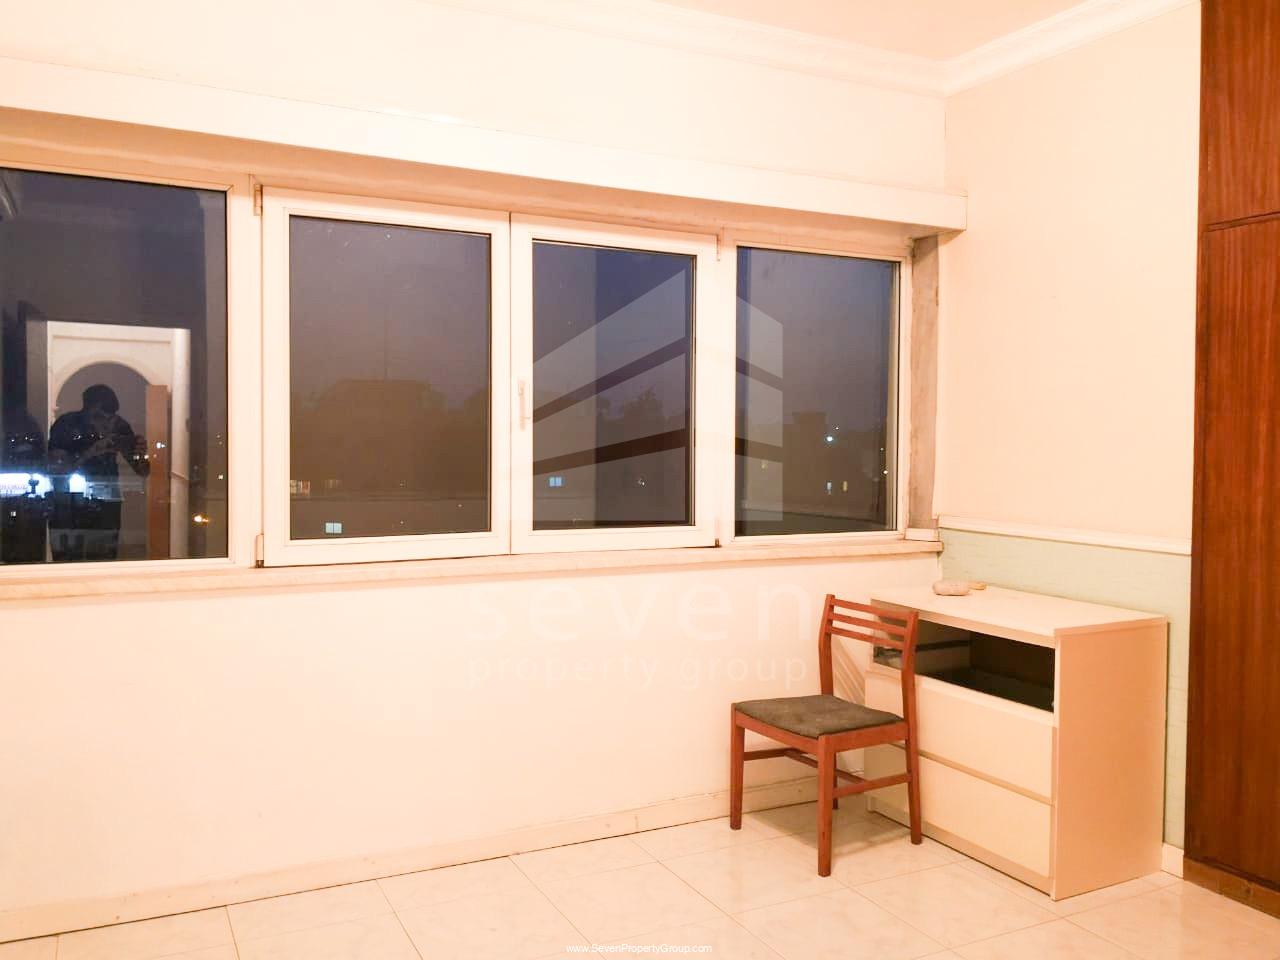 2BED FLAT FOR SALE IN DROSIA